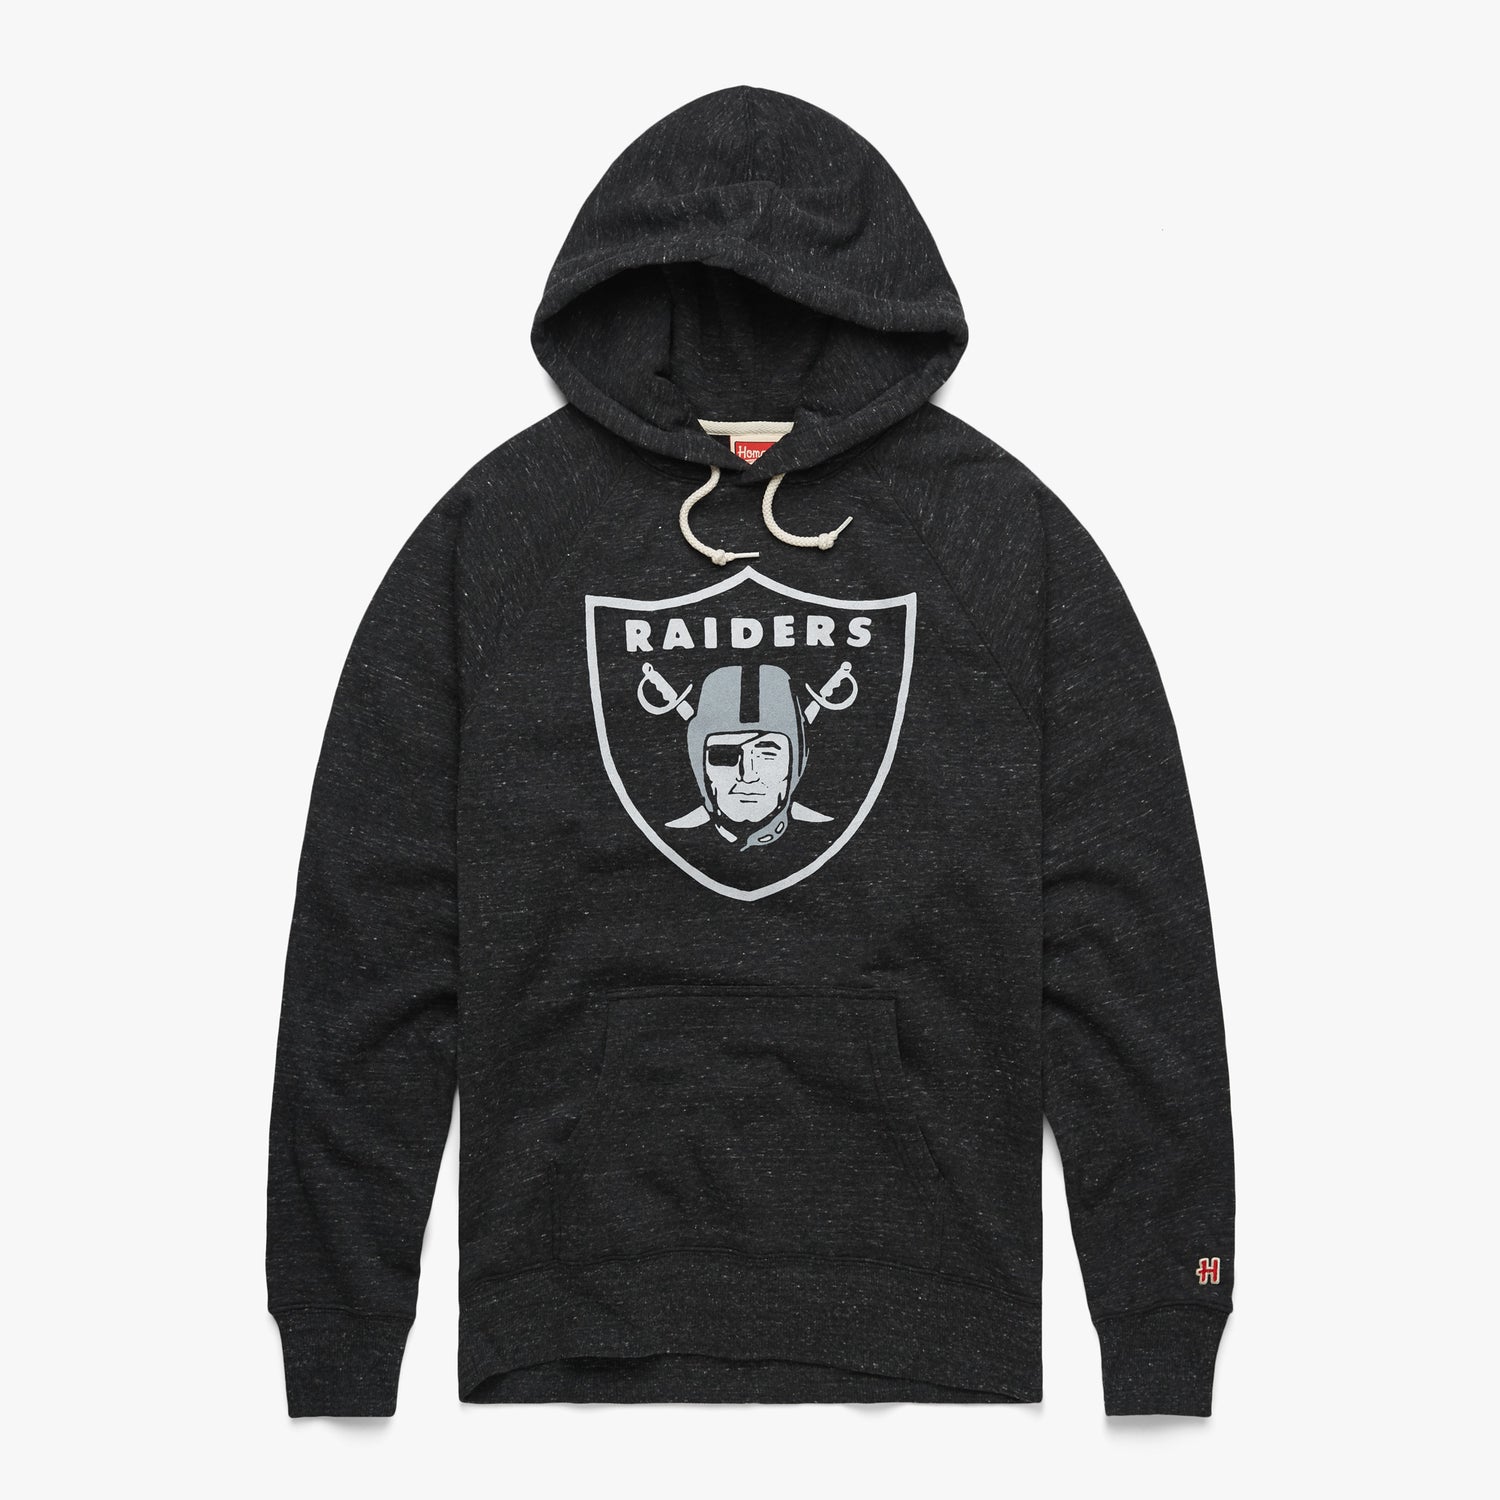 Las Vegas Raiders '20 Hoodie from Homage. | Officially Licensed Vintage NFL Apparel from Homage Pro Shop.